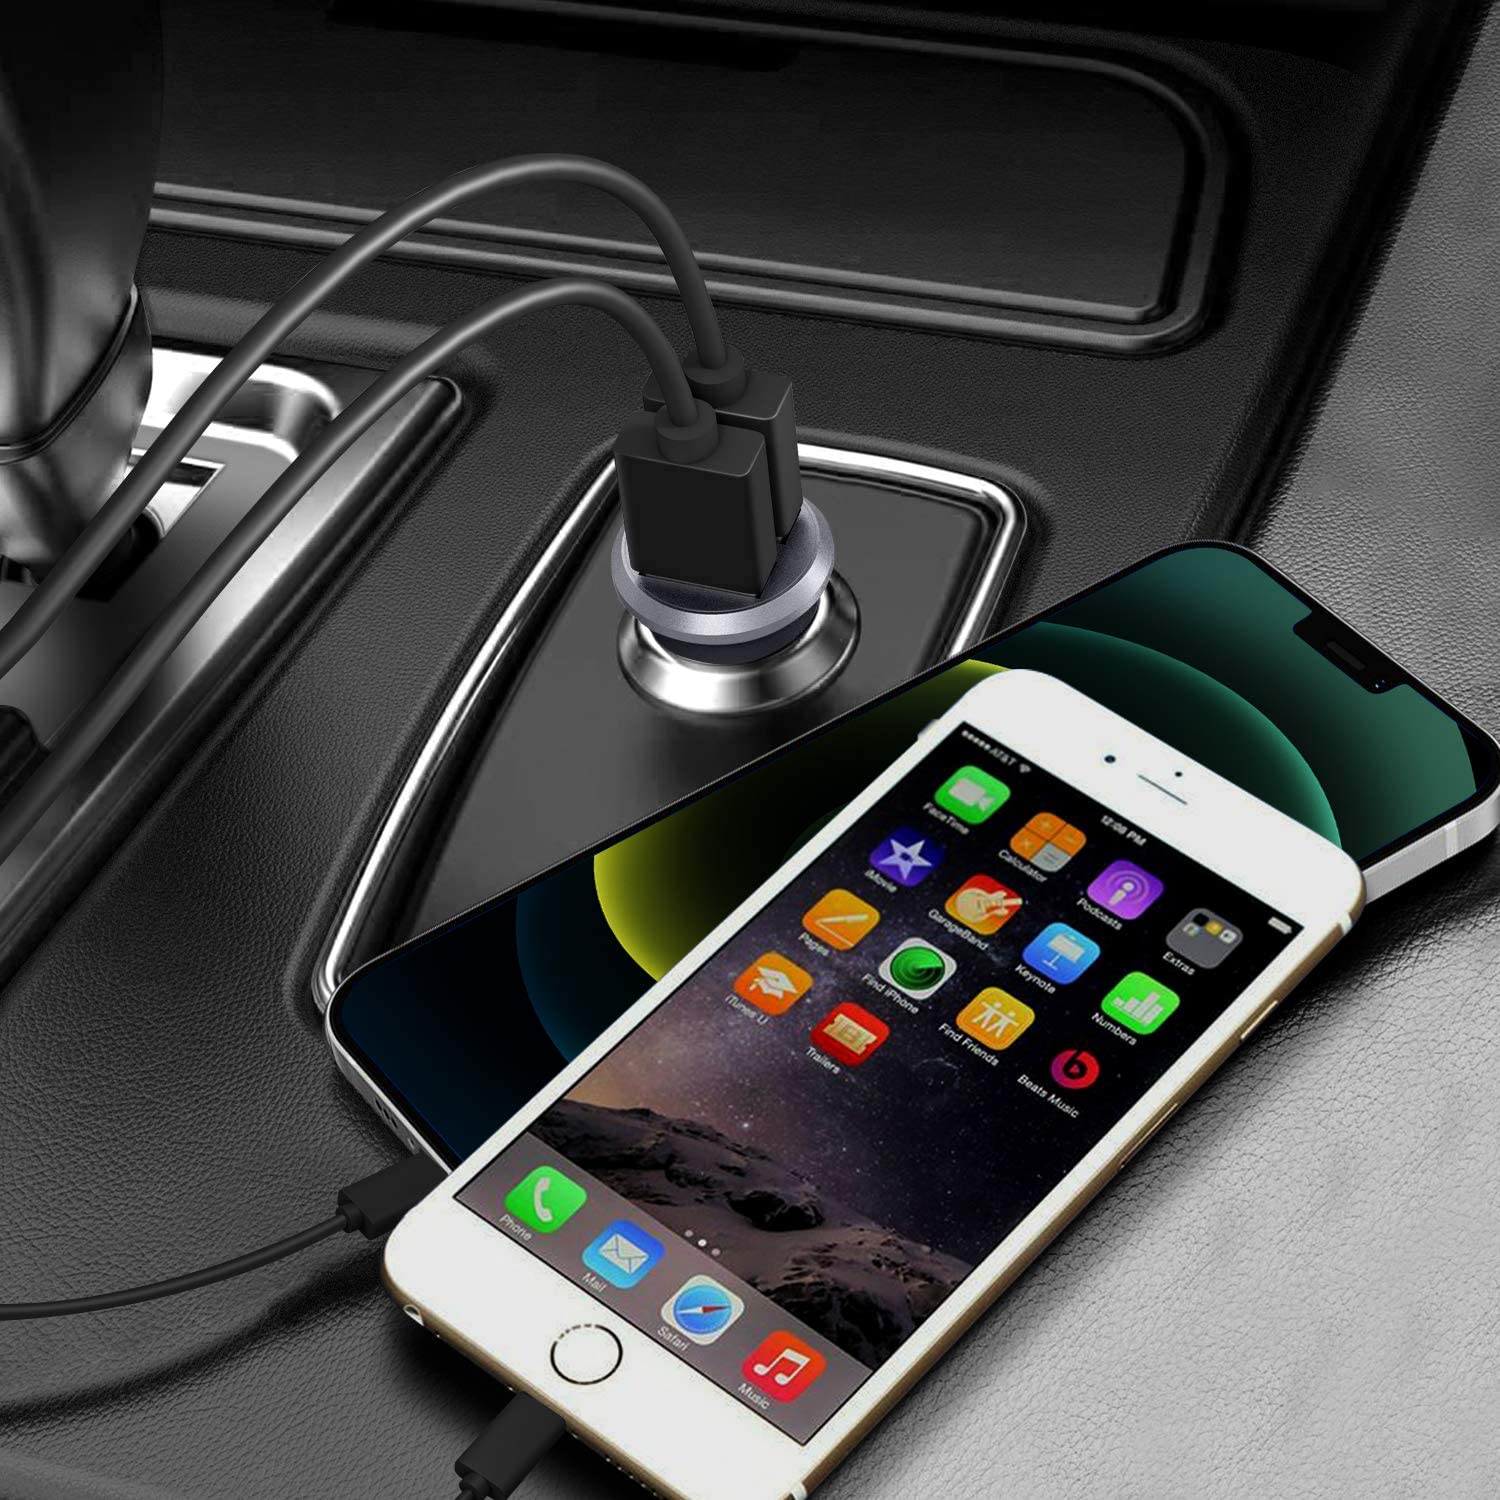 Rybozen Car Charger, Mini 4.8A All Metal USB Car Charger, PowerDrive 2 Alloy Flush Fit Car Charger Adapter Dual Port Charging,for iPhone 12/11 pro/XR/x/7/6s, iPad Air 2/Mini 3, Note 9/Galaxy S10/S9/S8